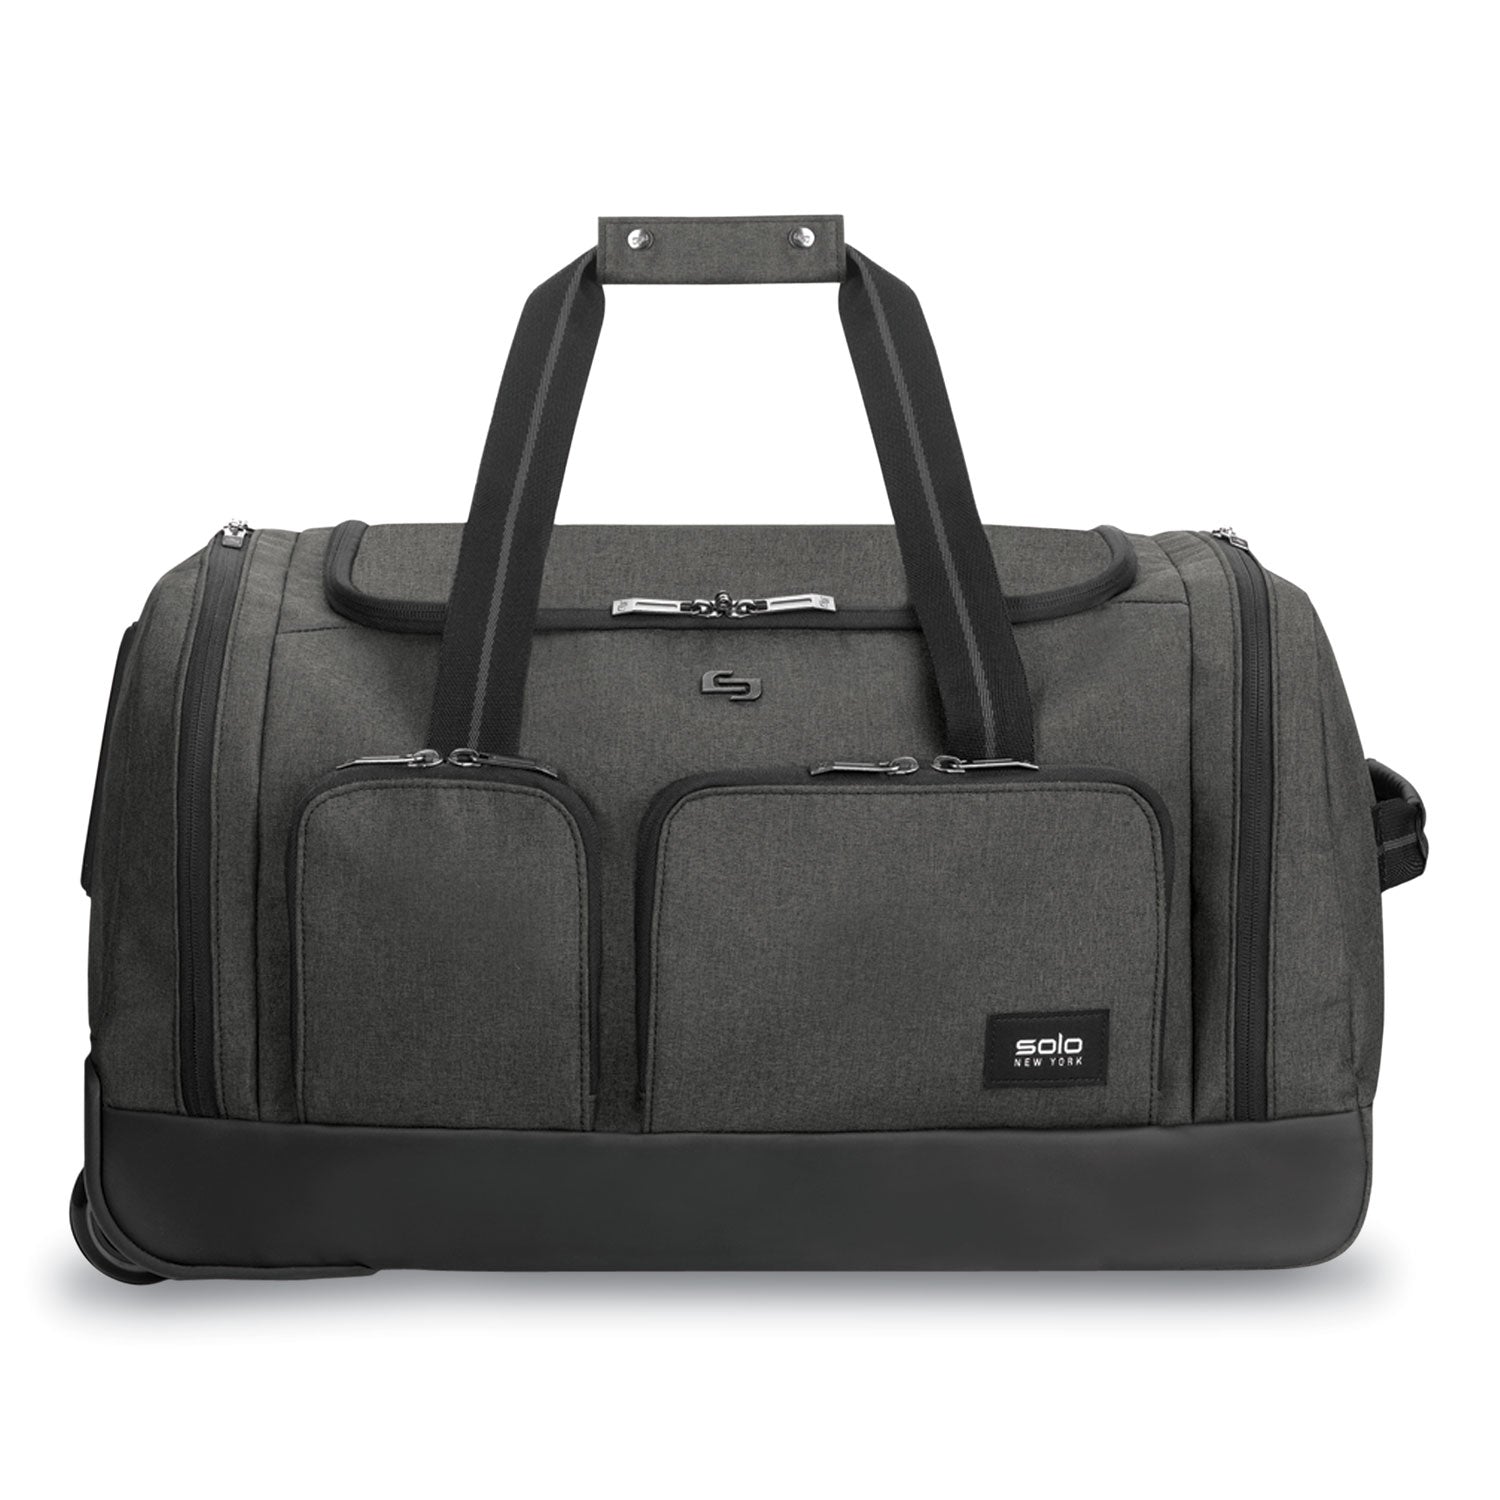 leroy-rolling-duffel-fits-devices-up-to-156-polyester-12-x-105-x-105-gray_uslubn98010 - 1